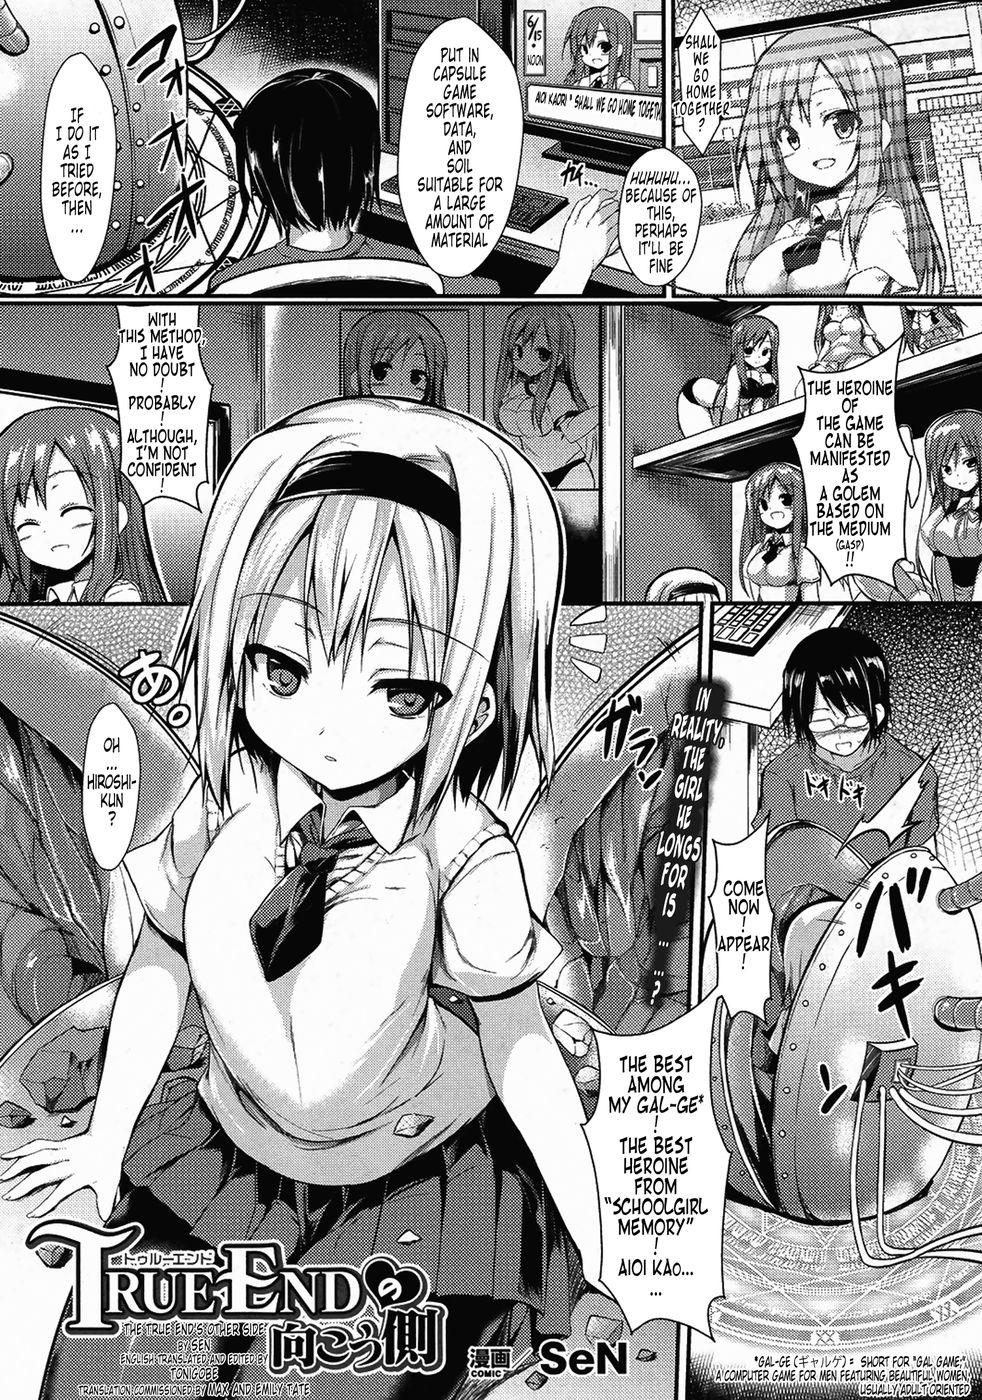 Hentai Manga Comic-The True Ending's Other Side-Read-1